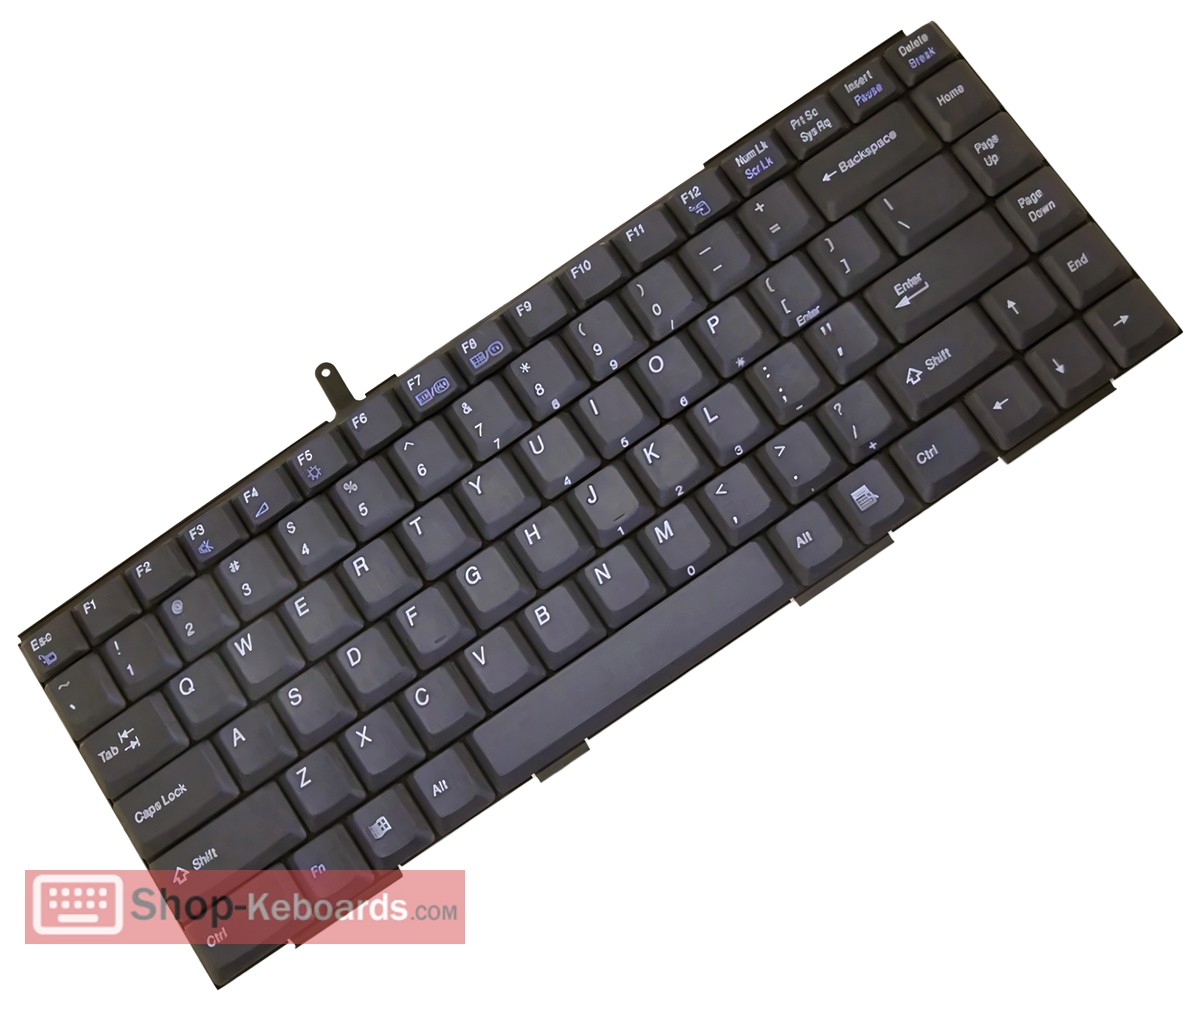 Sony VAIO PCG-F660 Keyboard replacement